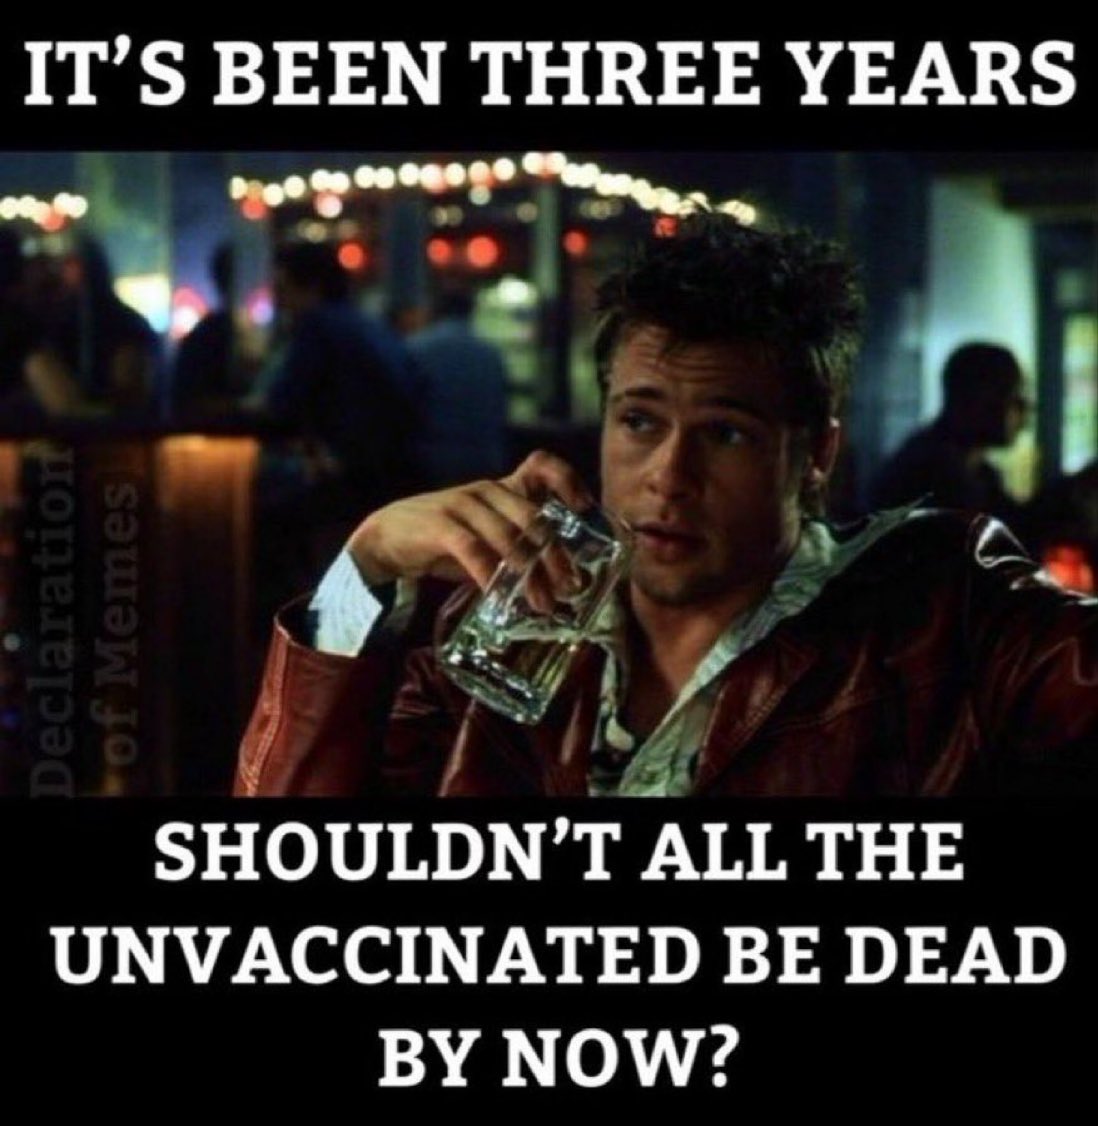 'The Pandemic of the Unvaccinated'